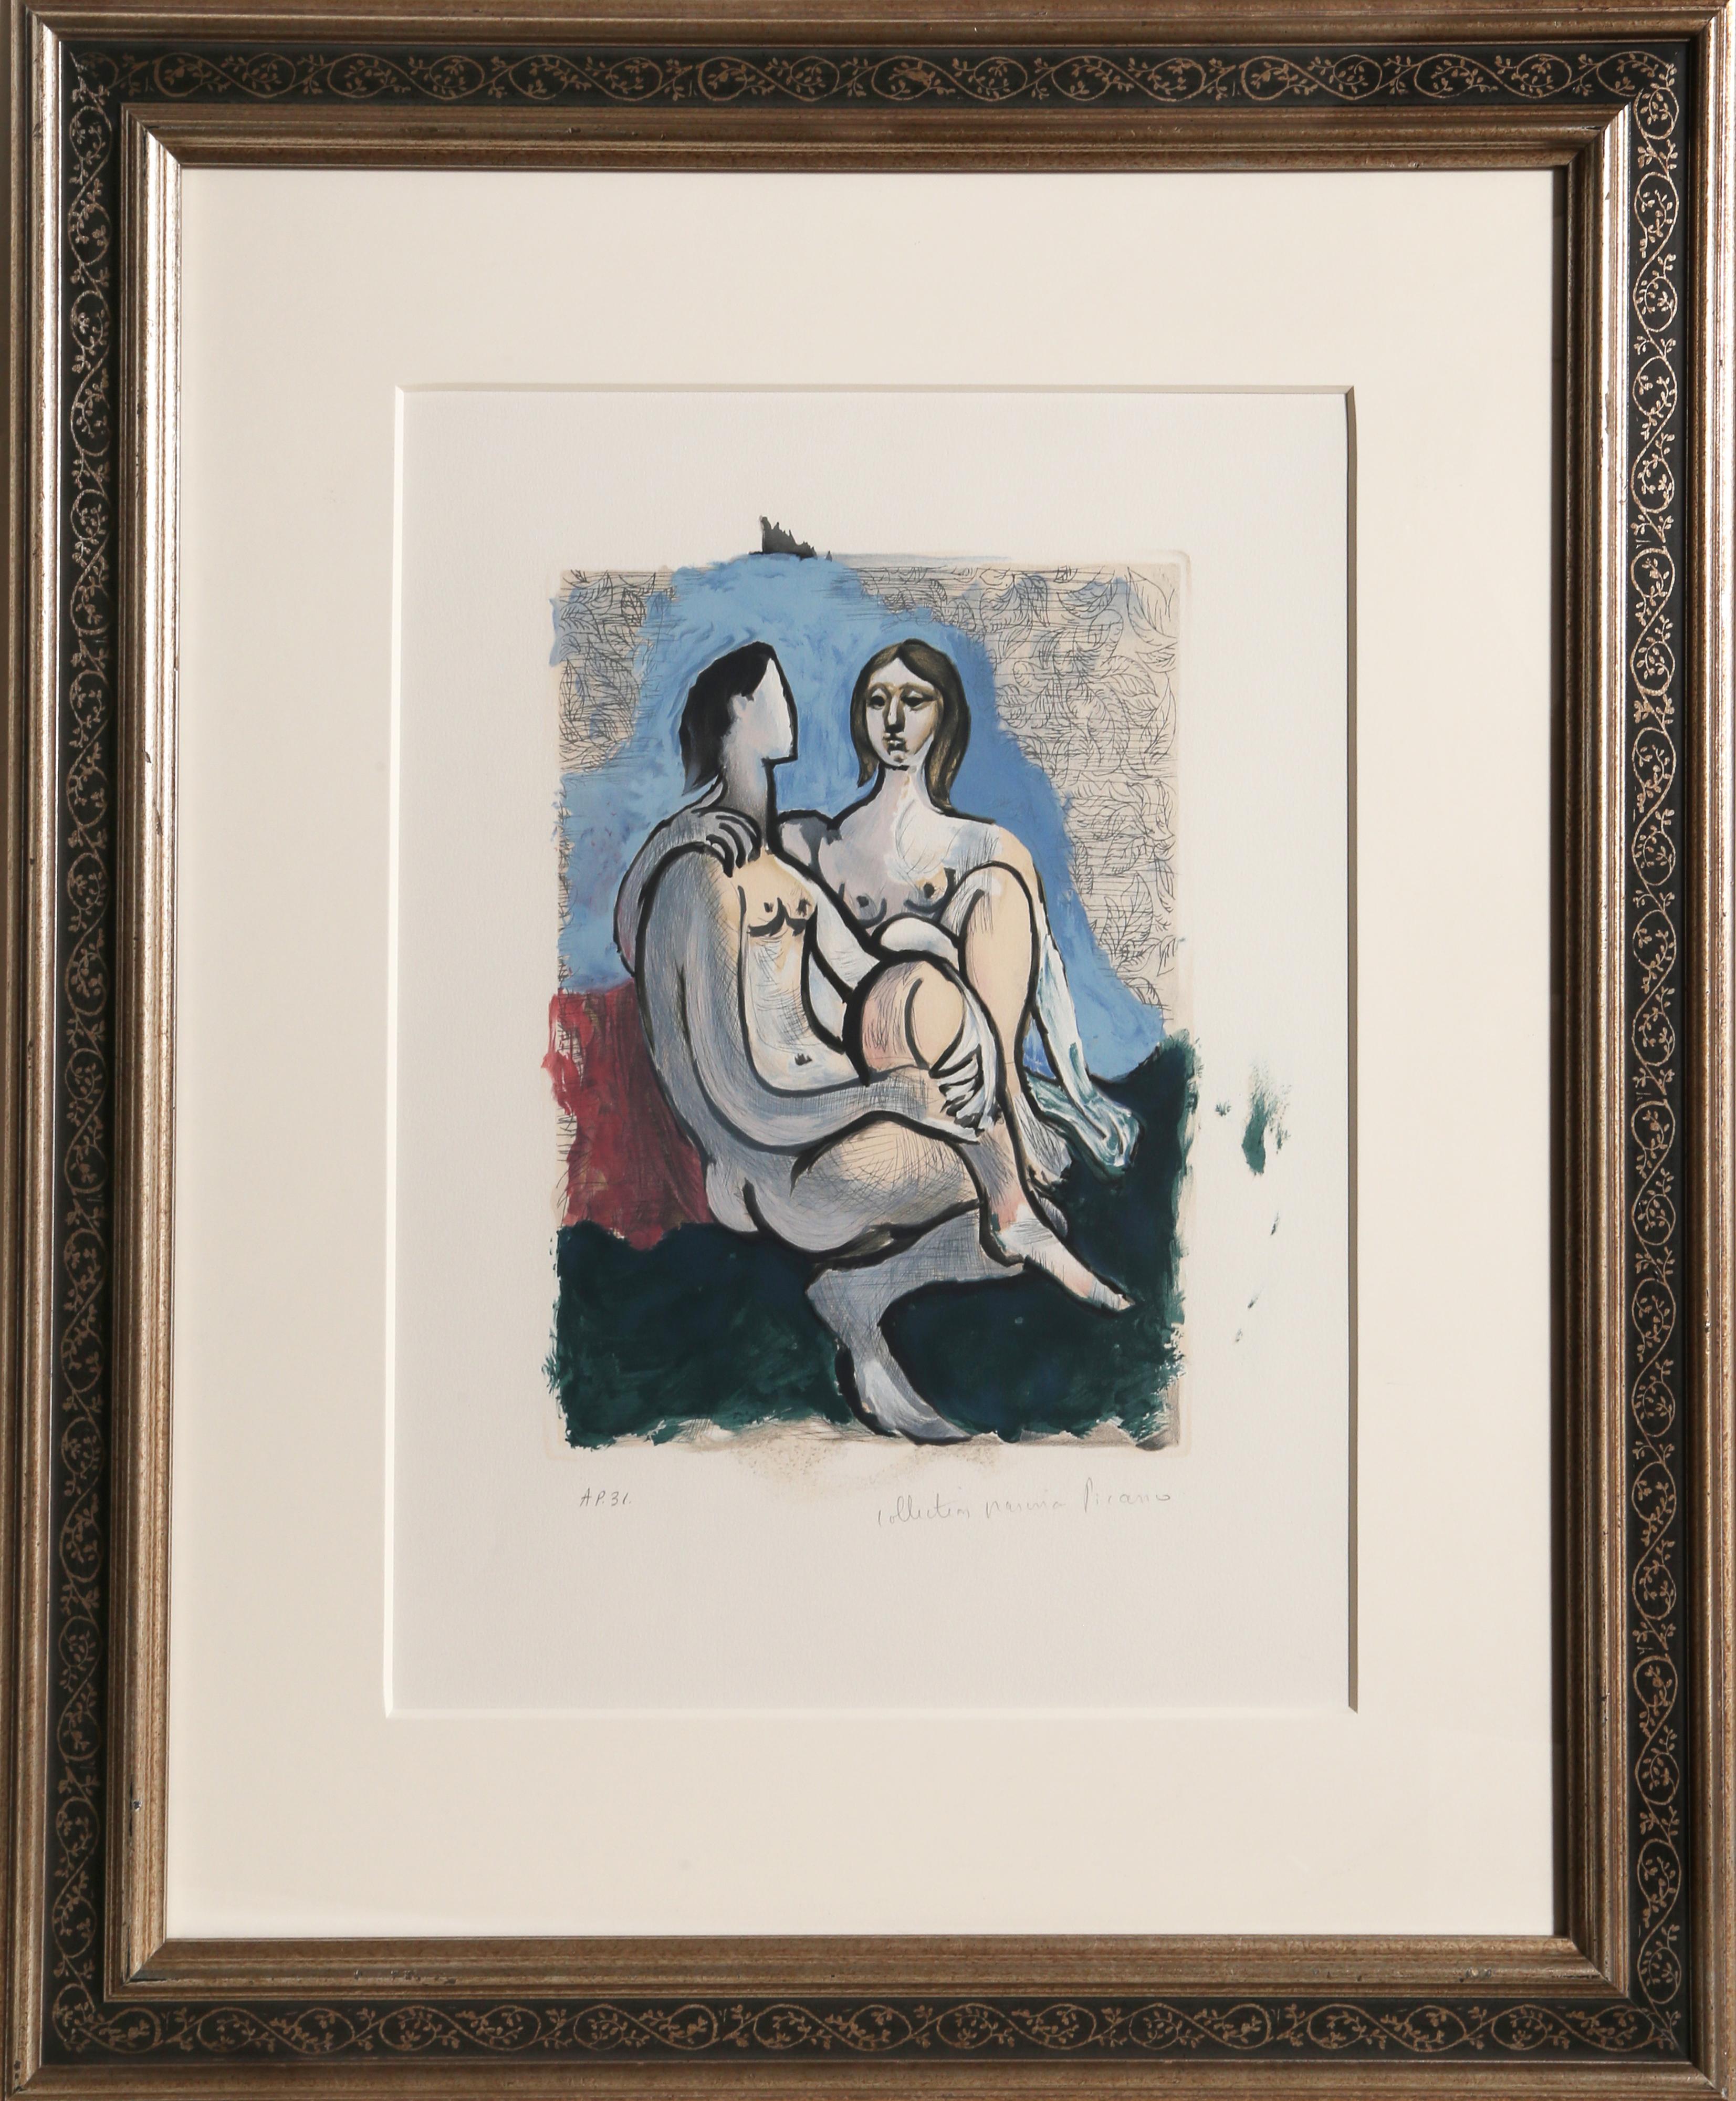 A lithograph from the Marina Picasso Estate Collection after the Pablo Picasso painting "La Couple". The original painting was completed in 193o. In the 1970's after Picasso's death, Marina Picasso, his granddaughter, authorized the creation of this